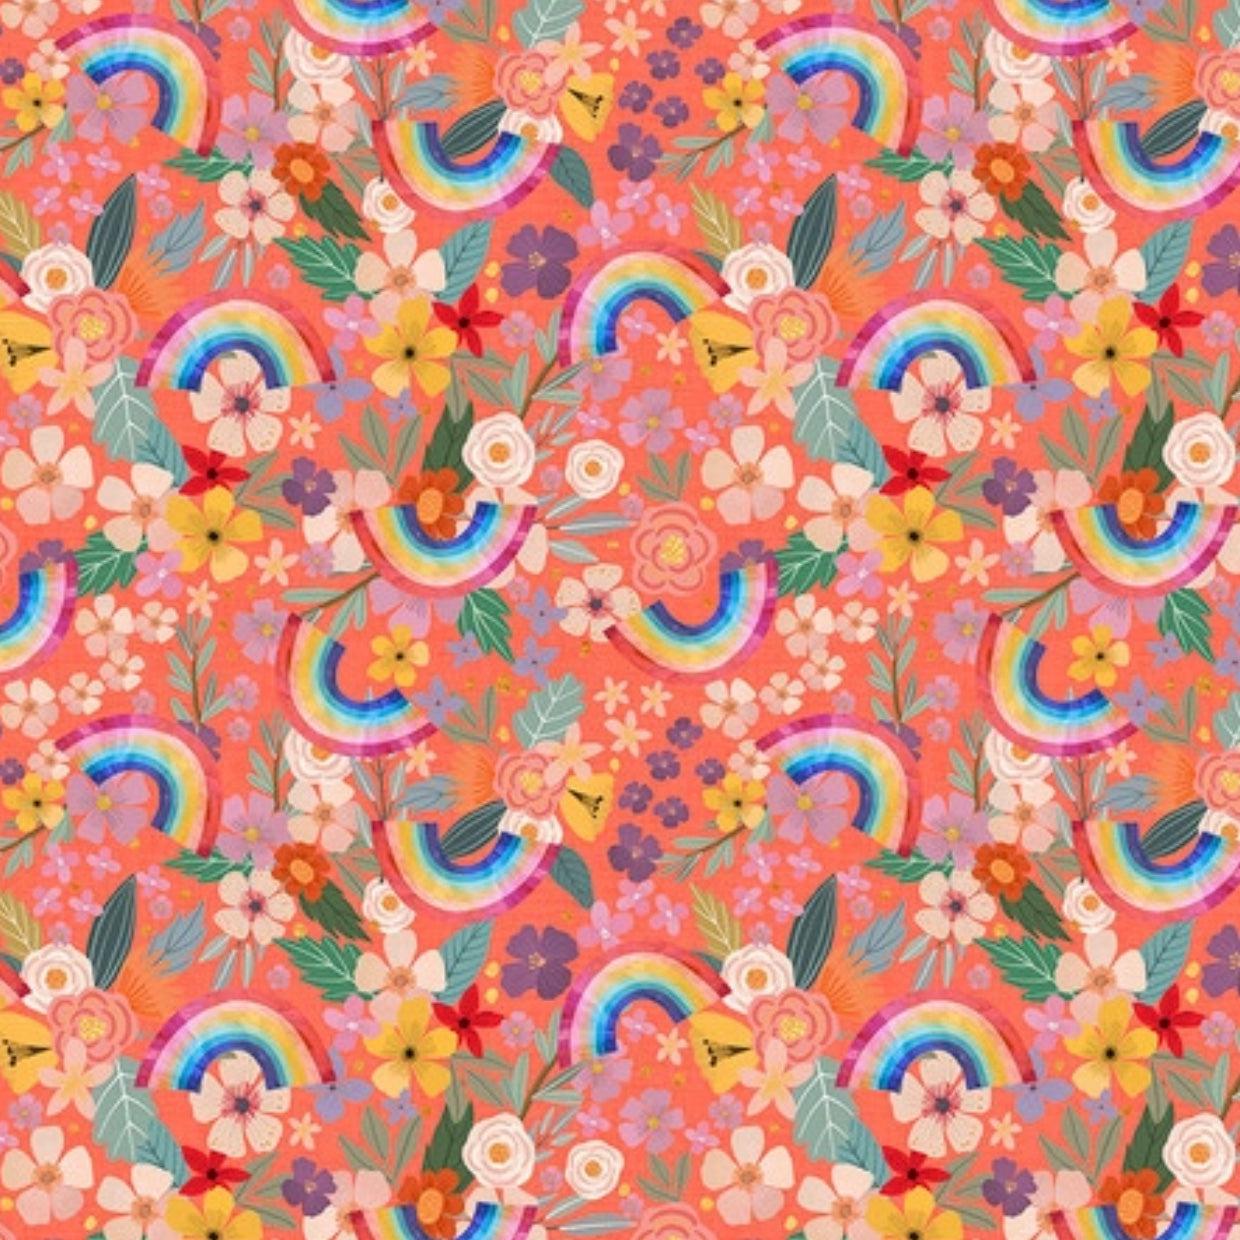 Magic Friends Coral Rainbows and Flowers Fabric-Free Spirit Fabrics-My Favorite Quilt Store